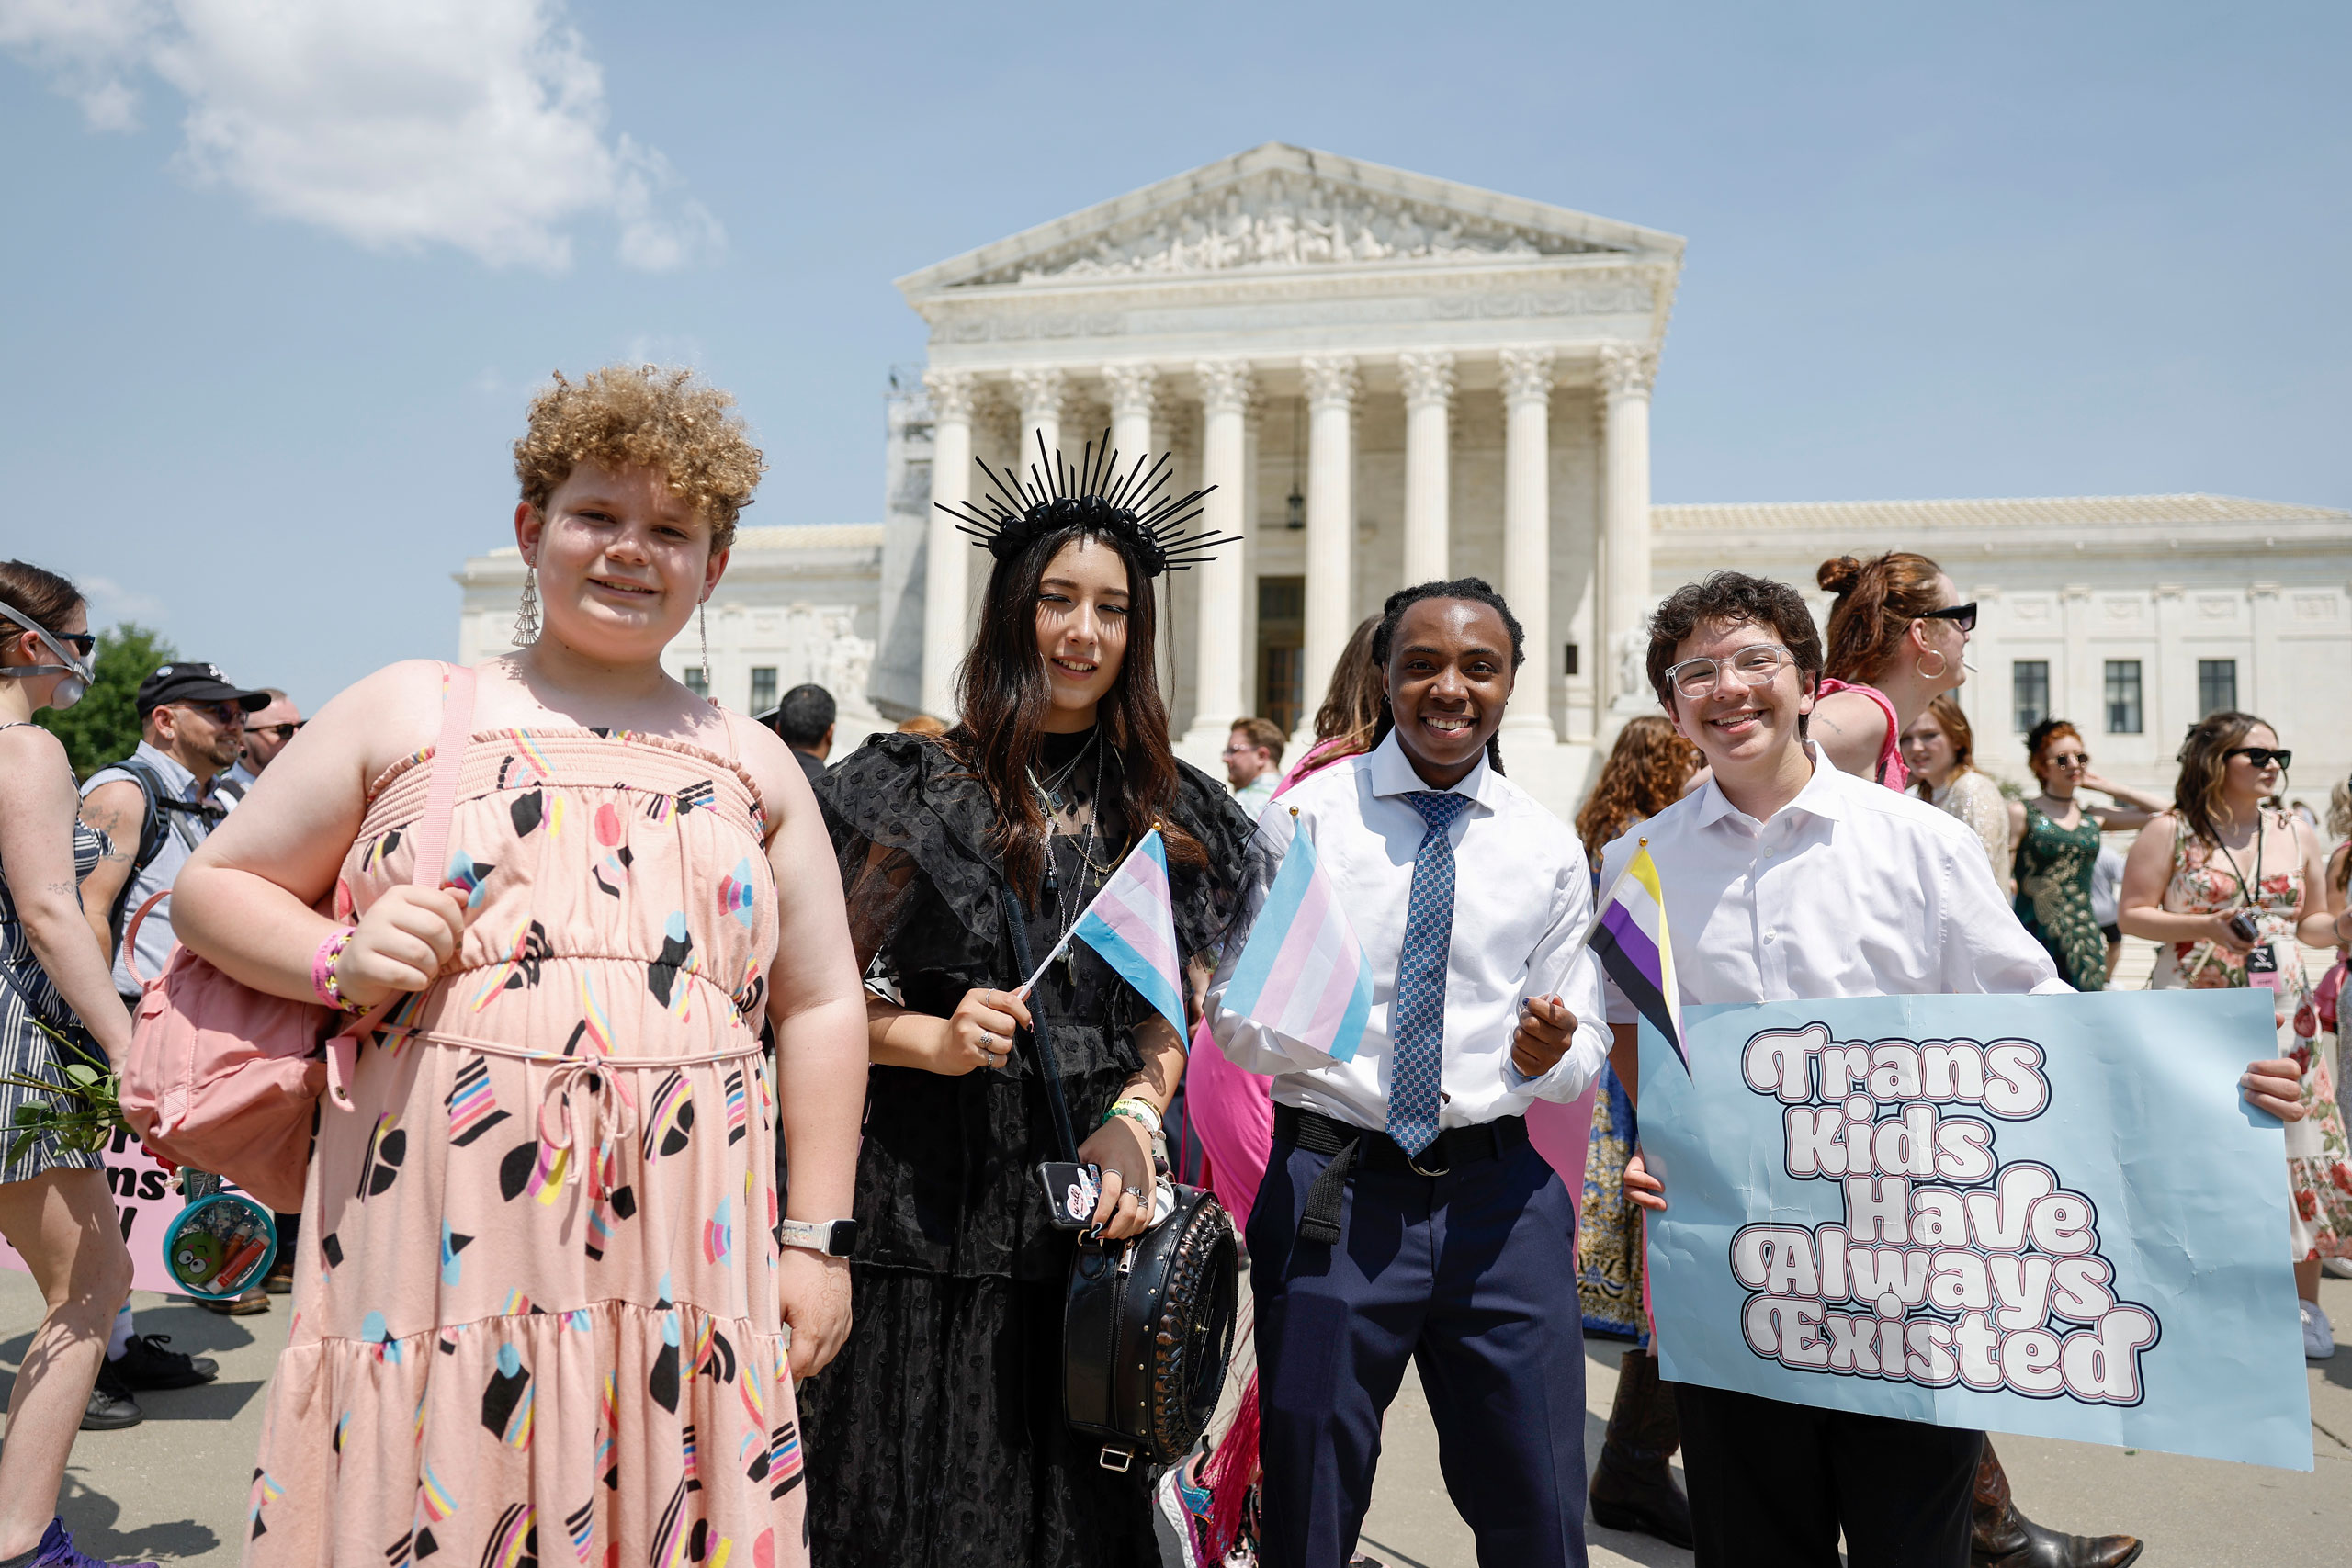 Grayson McFerrin, 12, Libby Gonzales, 13, Hobbes Chukumba, 16, and Daniel Trujillo, 15, the organizers of the “Trans Youth Prom” pose for a photo in front of the U.S. Supreme Court Building in Washington, D.C., on May 22, 2023. (Anna Moneymaker—Getty Images)